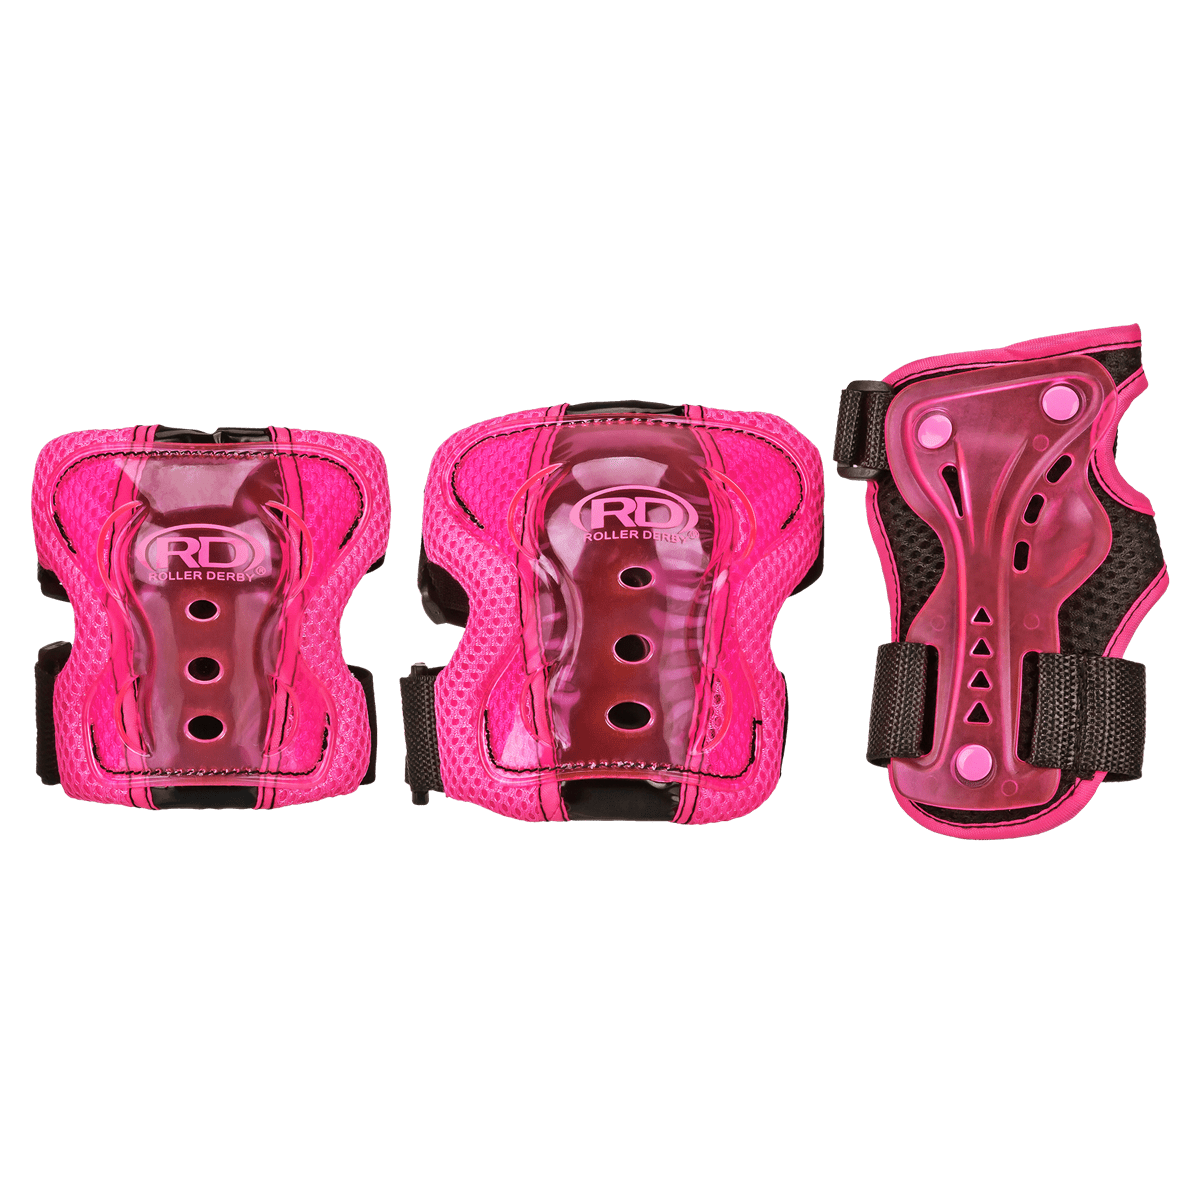 Roller Derby Protective Pack, Knee Pads, Wrist Guards, Elbow Pads